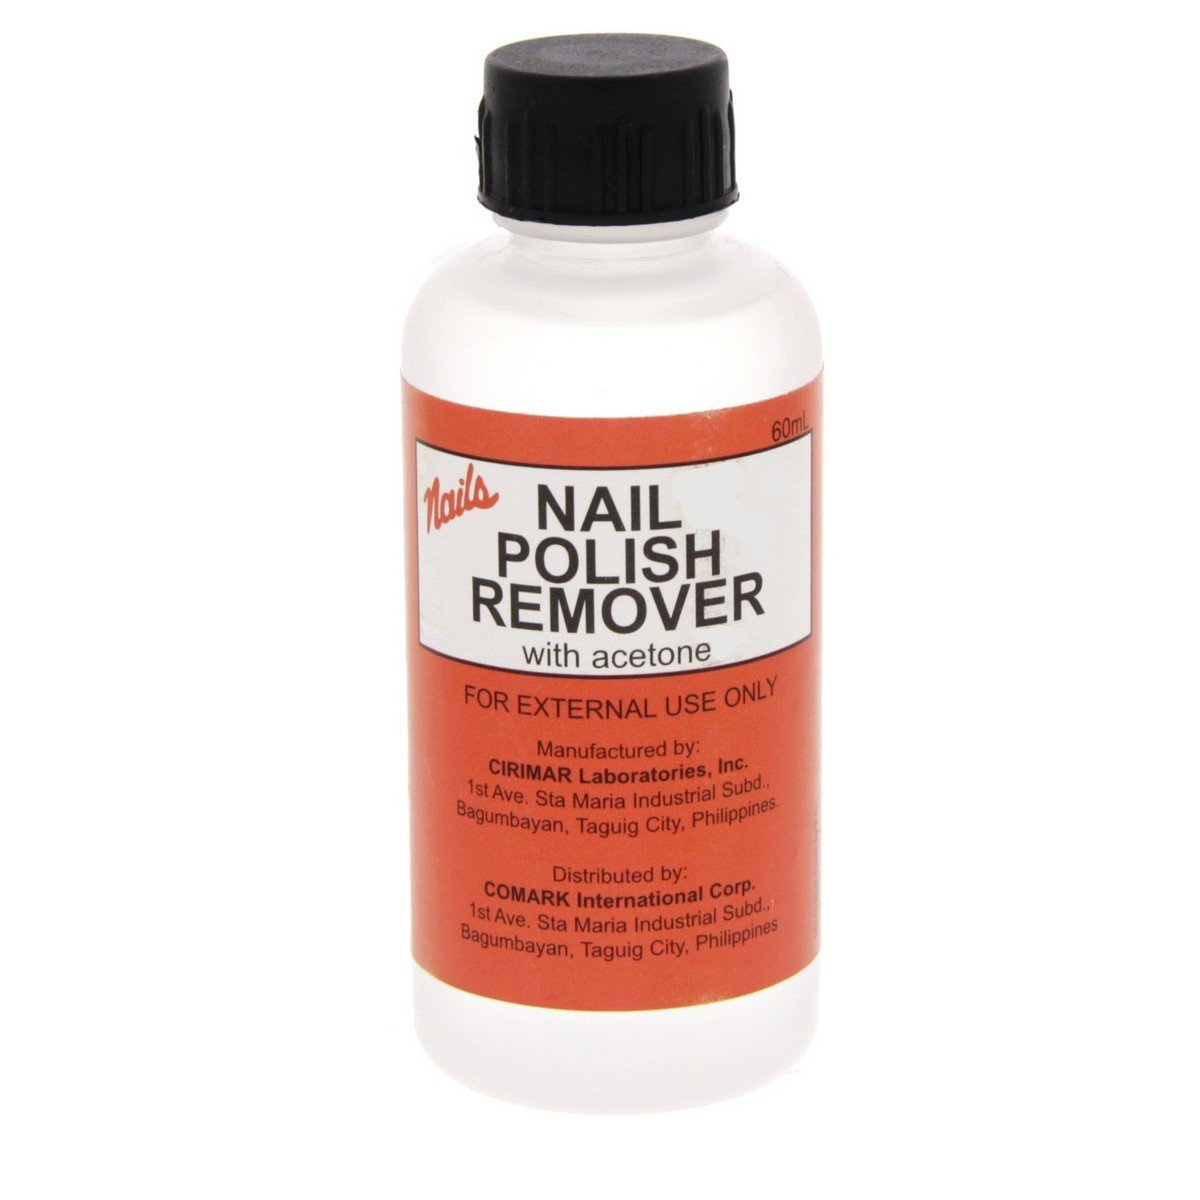 Nails Nail Polish Remover With Acetone 60ml